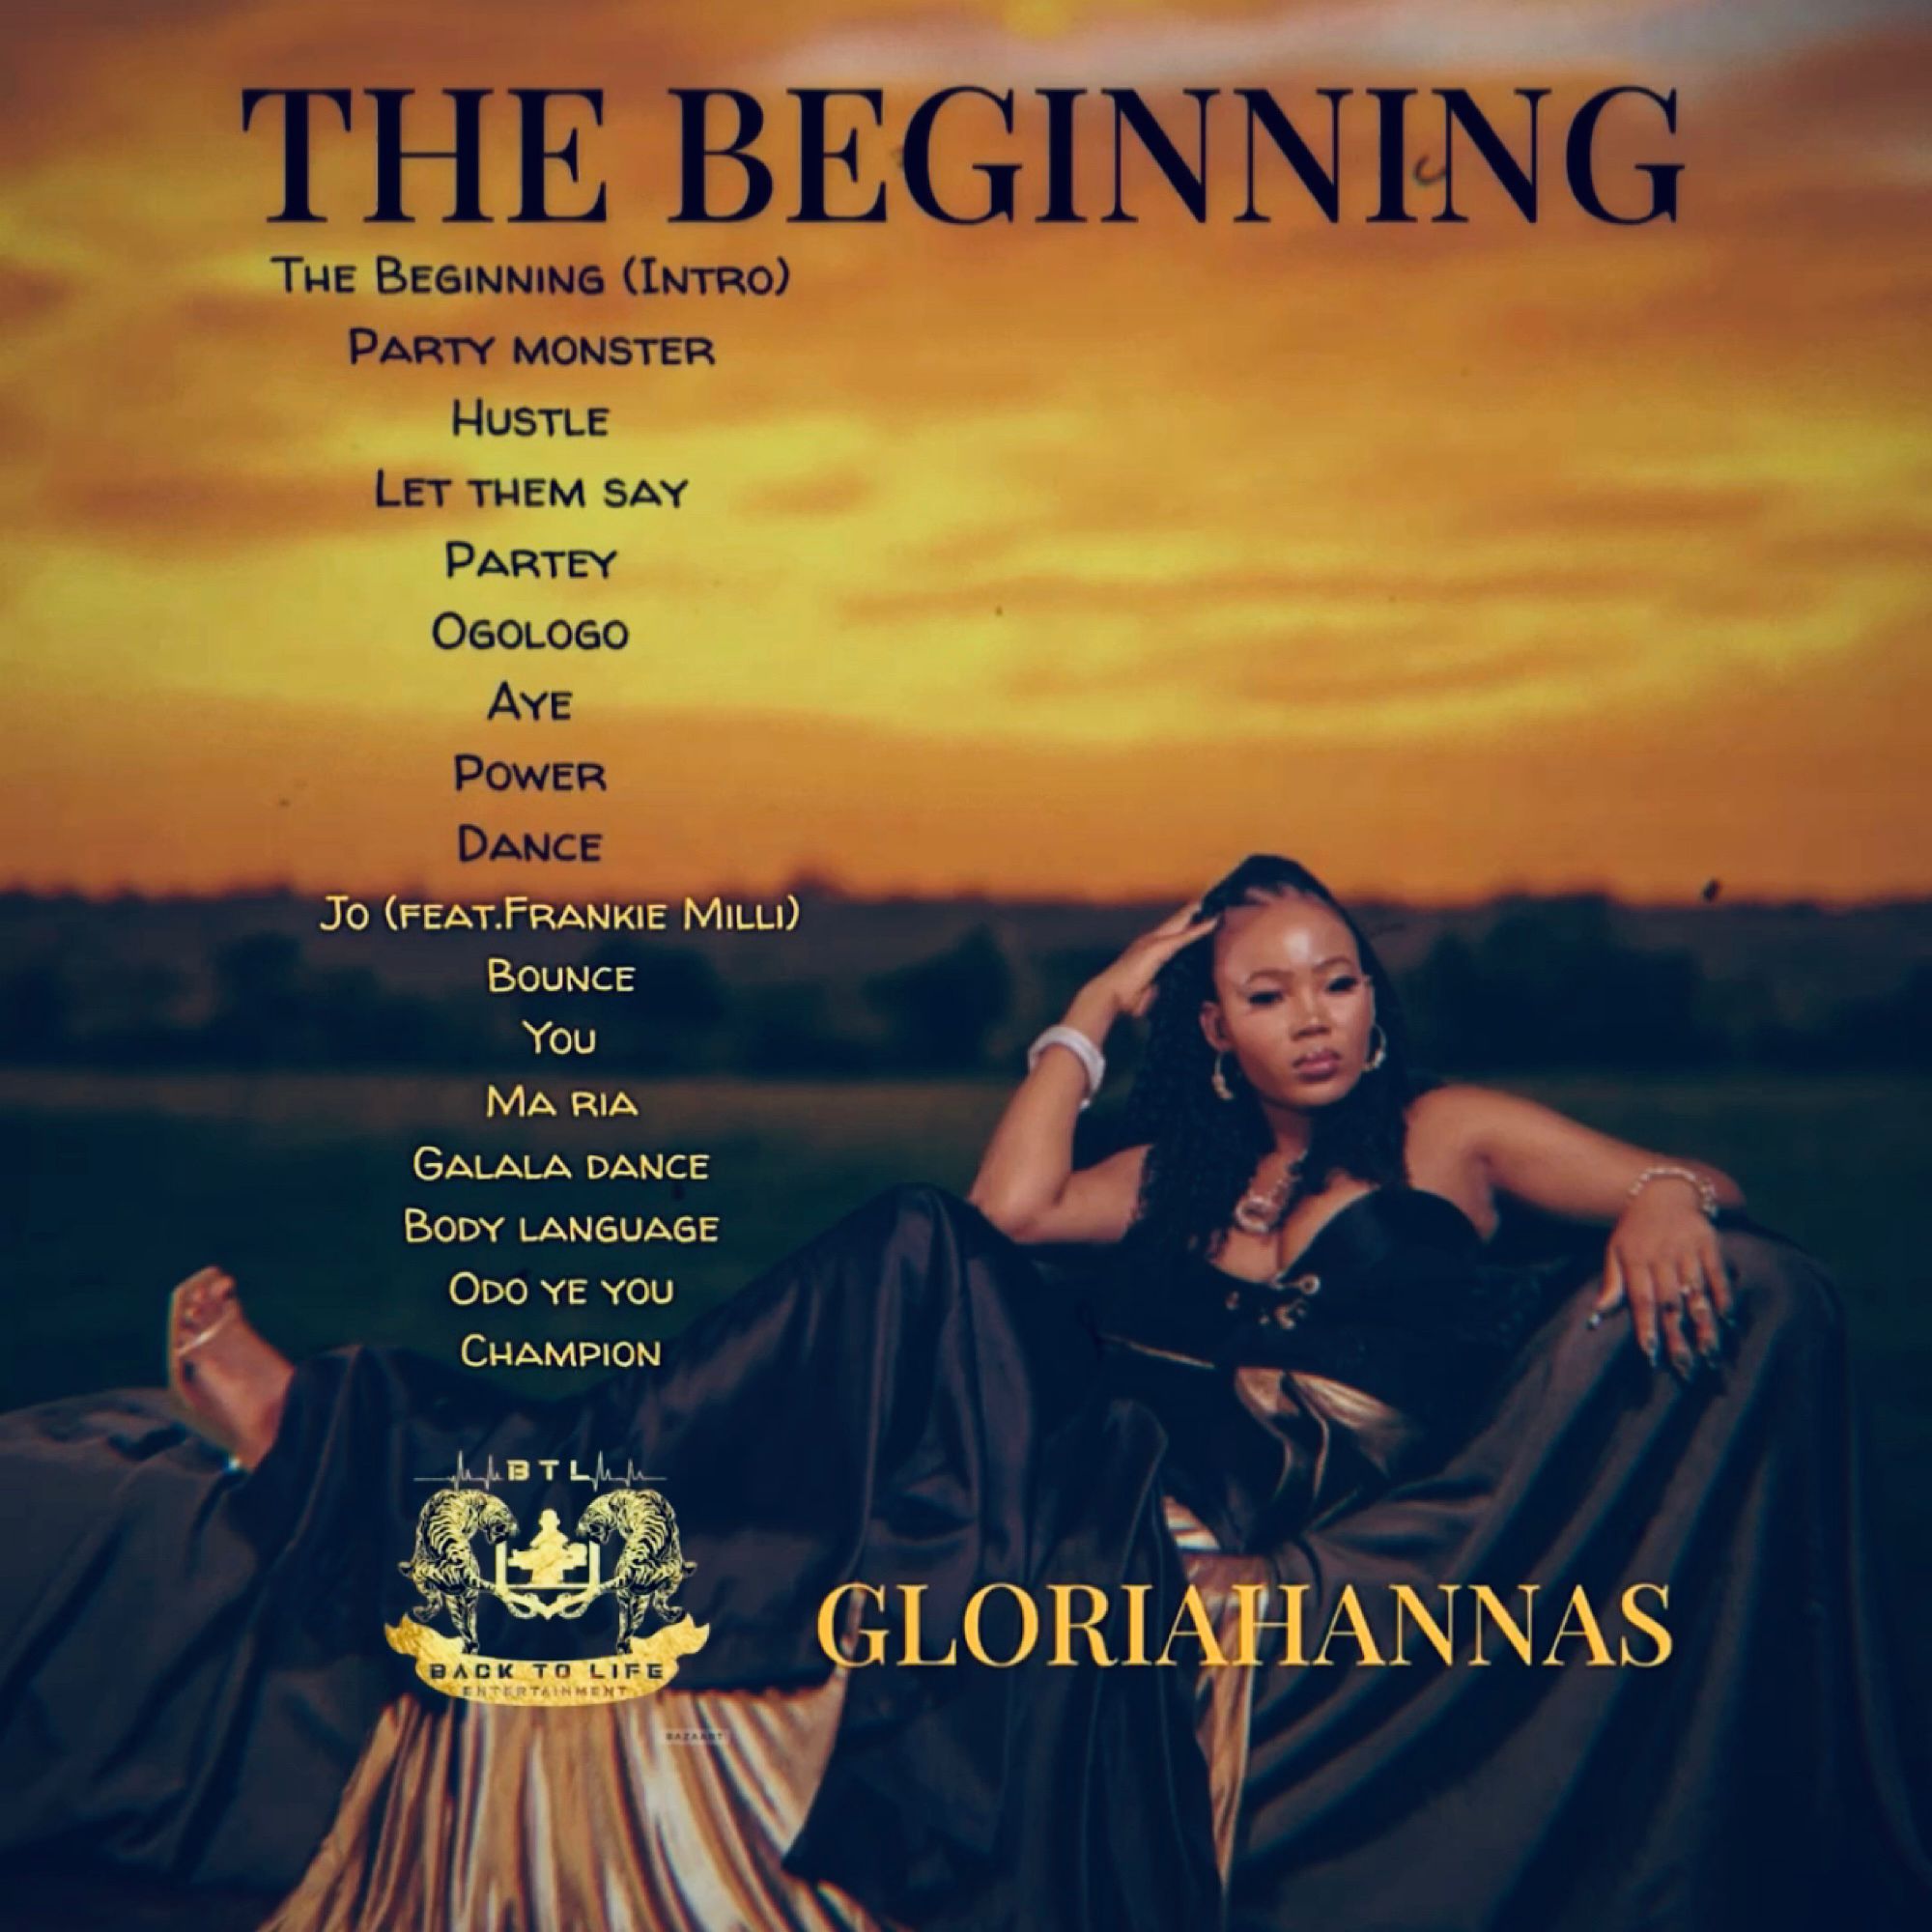 Get Ready to Groove! Gloriahannas Returns with a Bang: New Album ” The Beginning” Dropping August 4th!